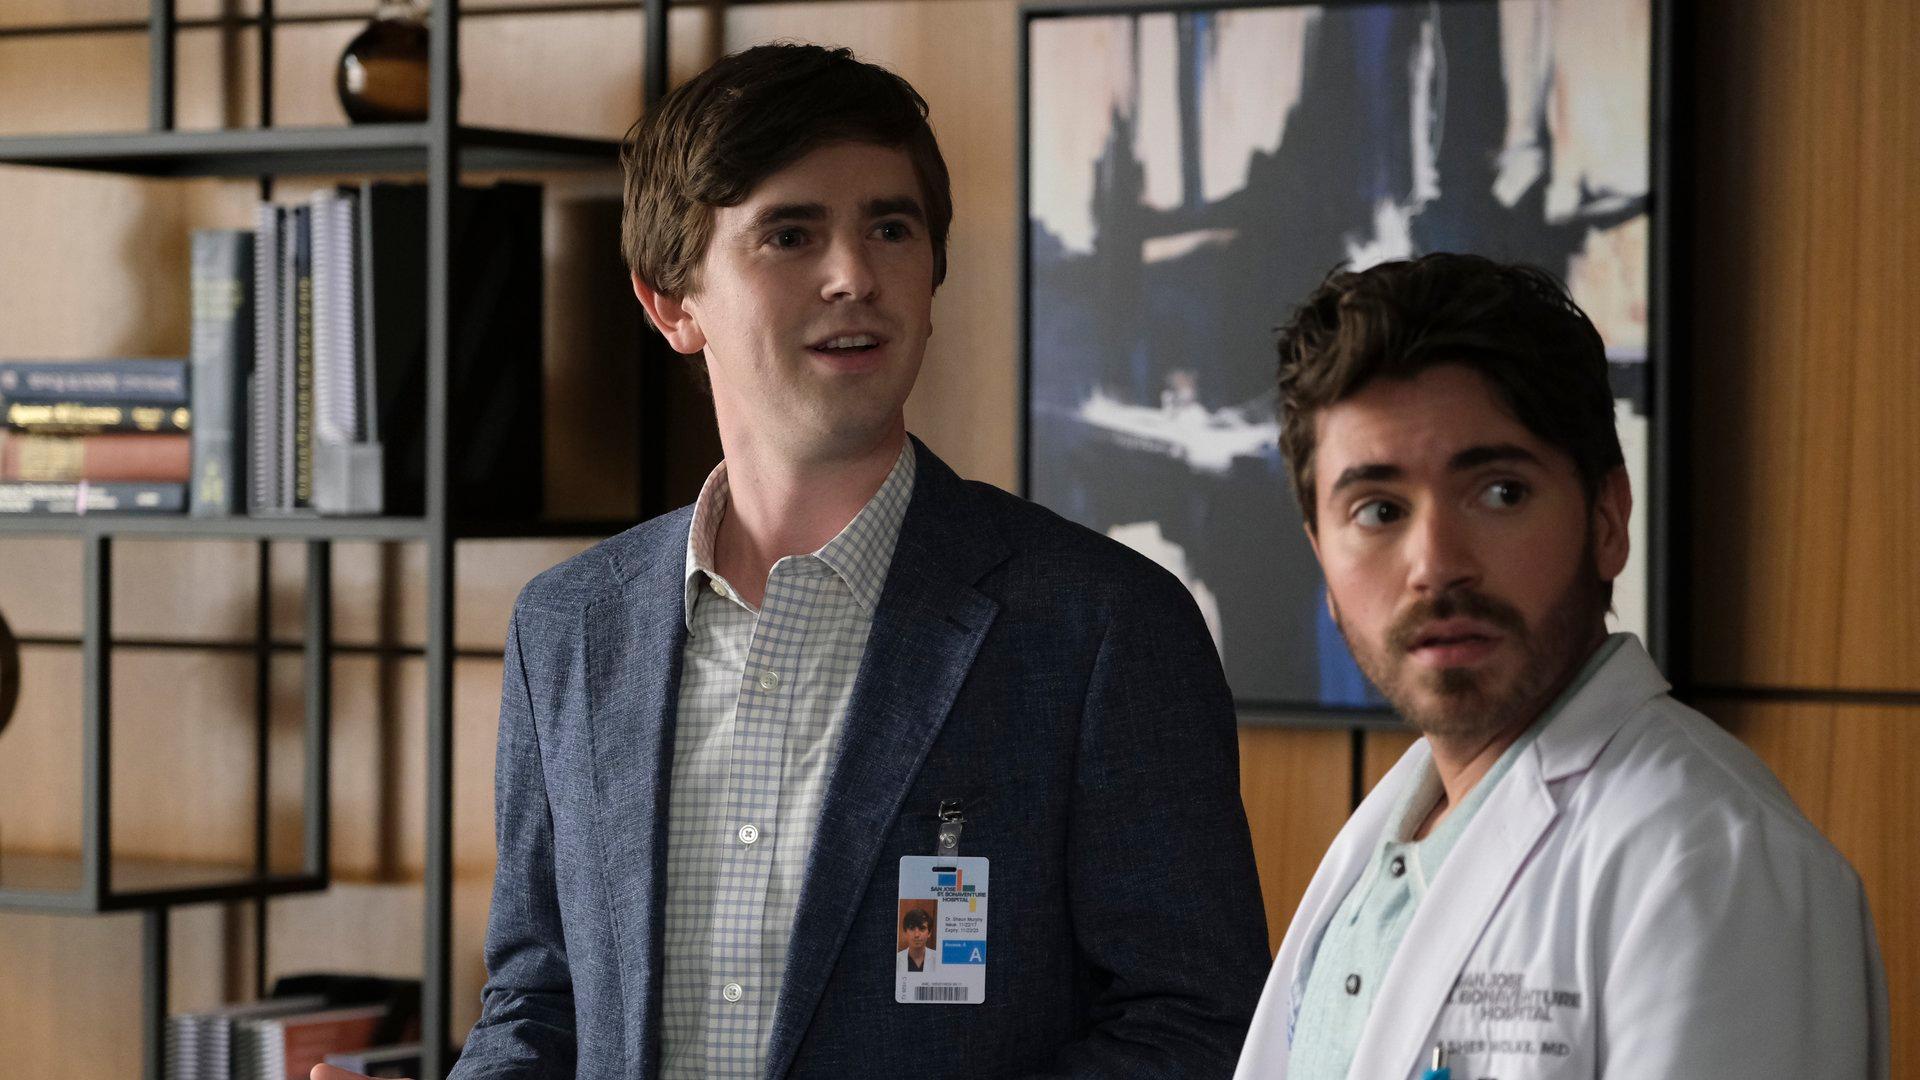 S6 Ep3 - Good Doctor, The